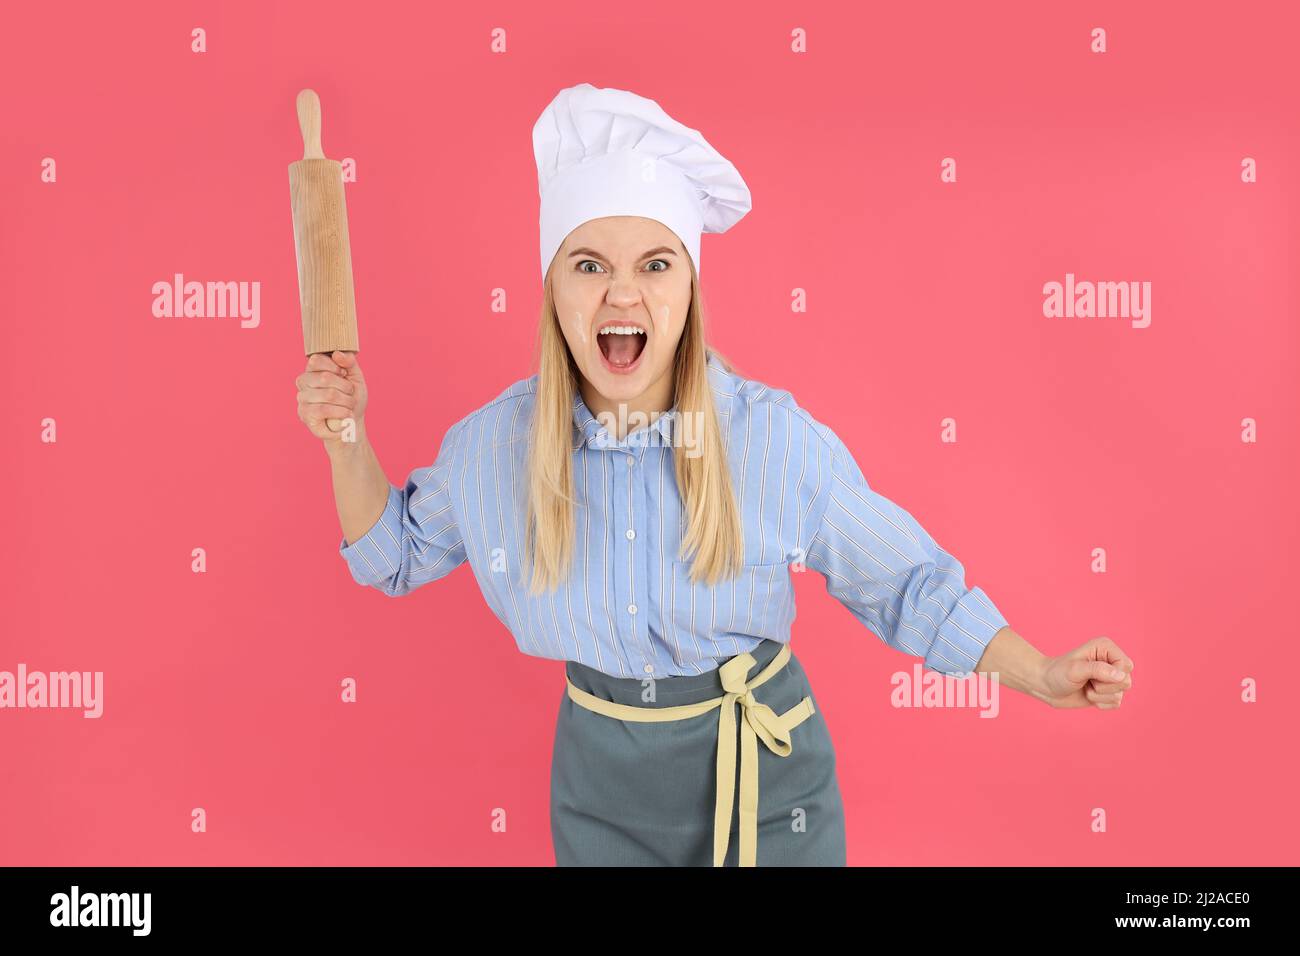 Angry woman with rolling pin on pink background Stock Photo